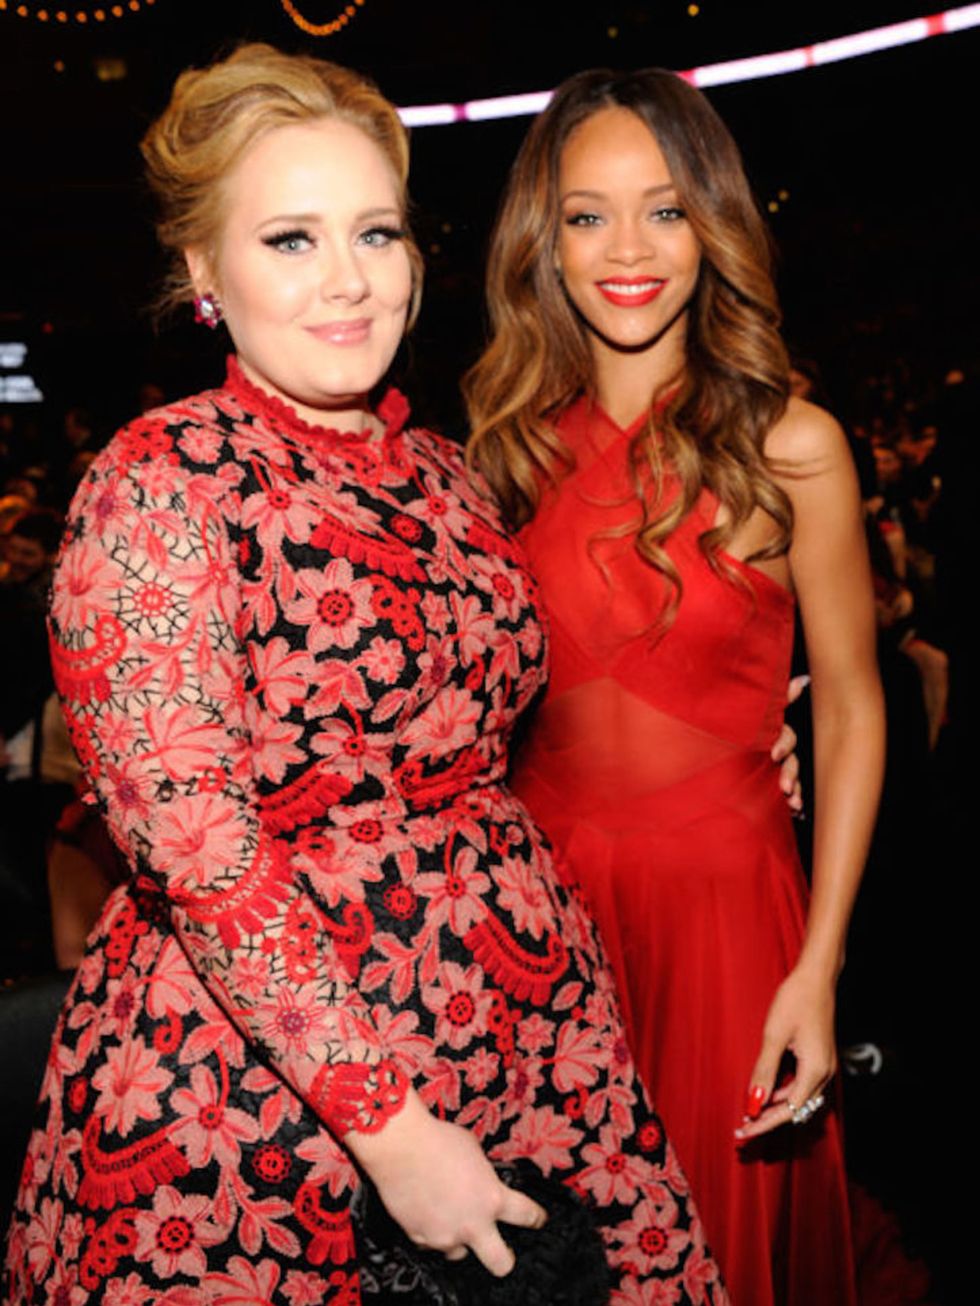 <p><strong>Adele and Rihanna</strong></p>

<p>There seems to be a mutual girl crush situation going on between Adele and RiRi. "If Rihanna wanted me, I'd do it with her. She's hot," Adele said . "She had pinstripe flares on. She whipped them off and there